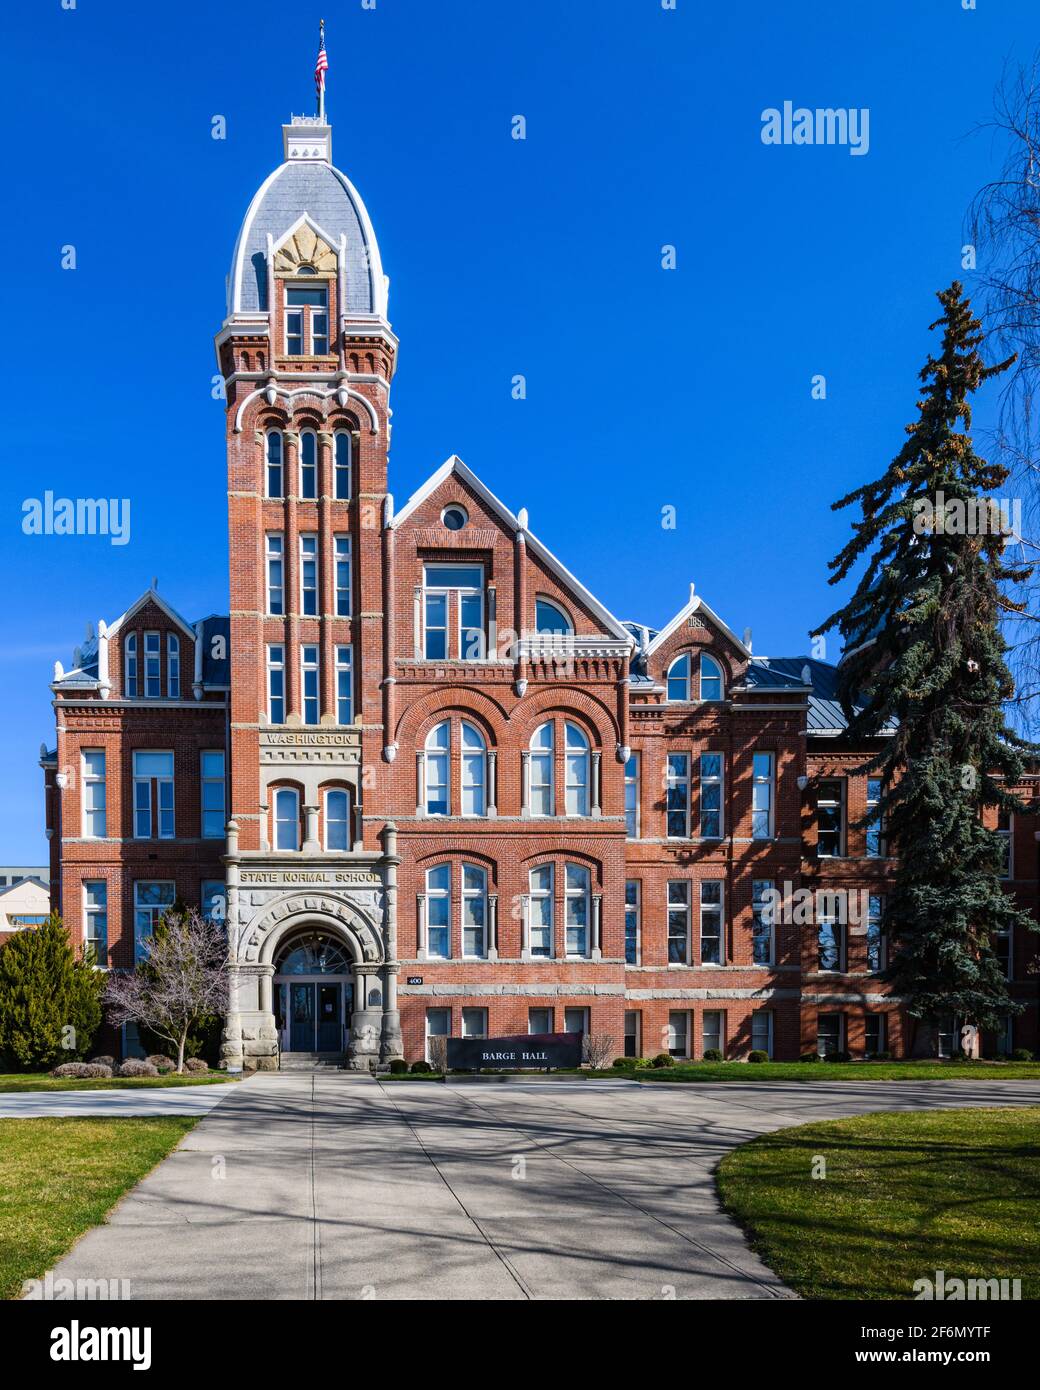 The Romanesque styled Barge Hall under a perfect blue sky at Central Washington University in Ellensburg with no people due to covid-19 restrictions Stock Photo